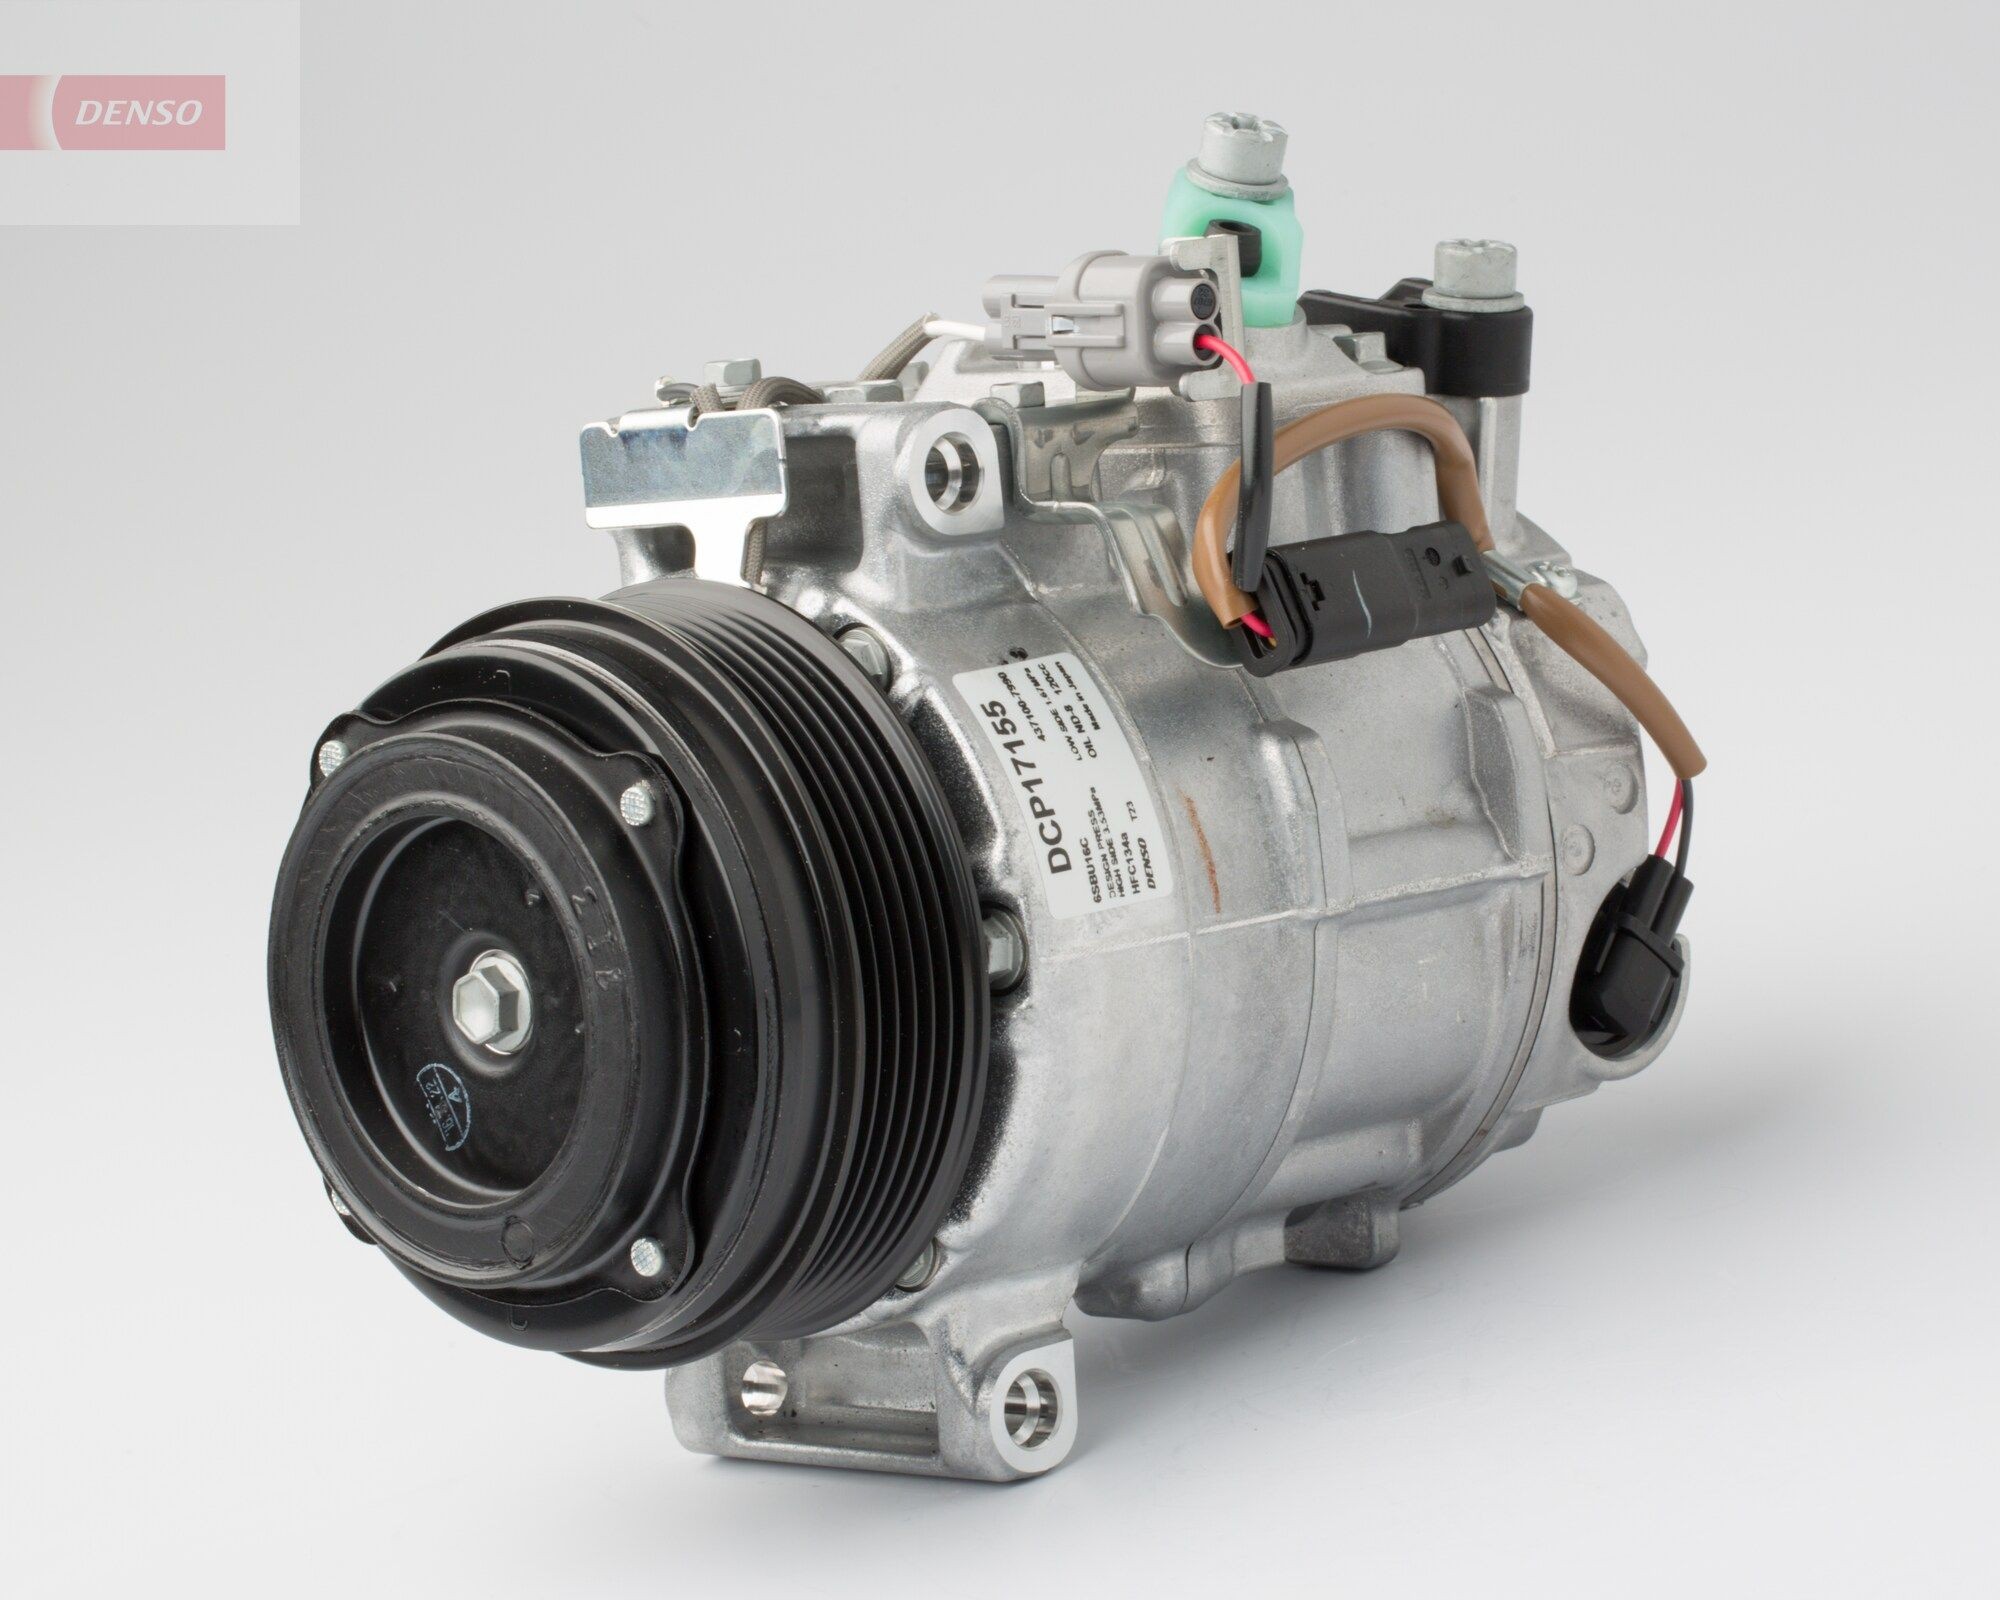 DENSO DCP17155 Air conditioning compressor 6SBU16C, 12V, PAG 46, R 134a, with magnetic clutch